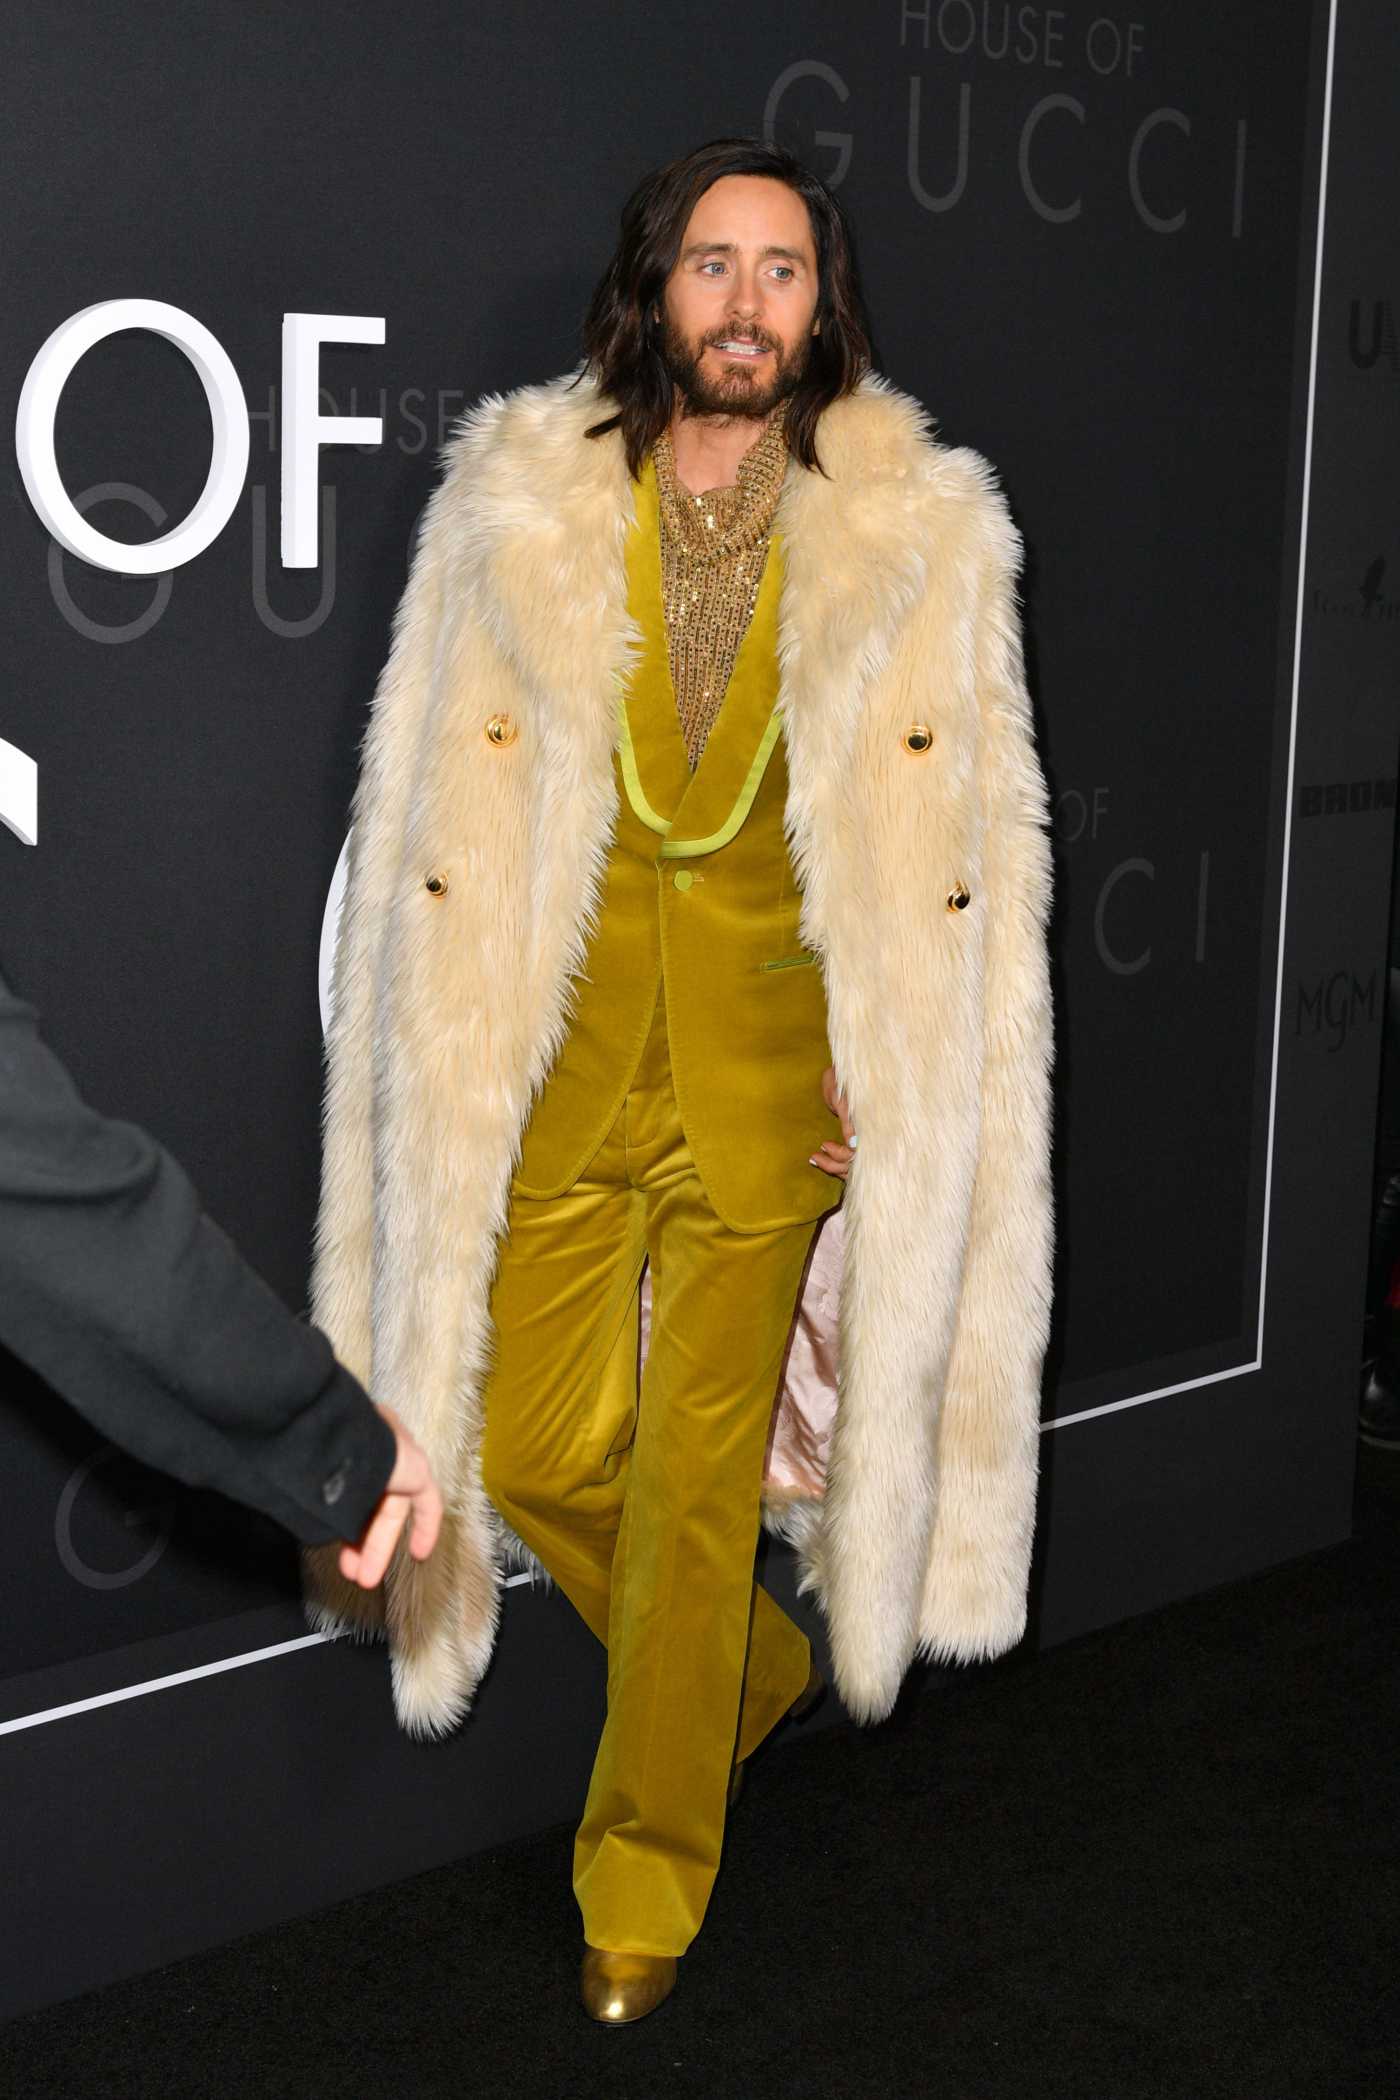 Jared Leto Attends the House of Gucci New York Premiere at Jazz at Lincoln Center in New York 11/16/2021